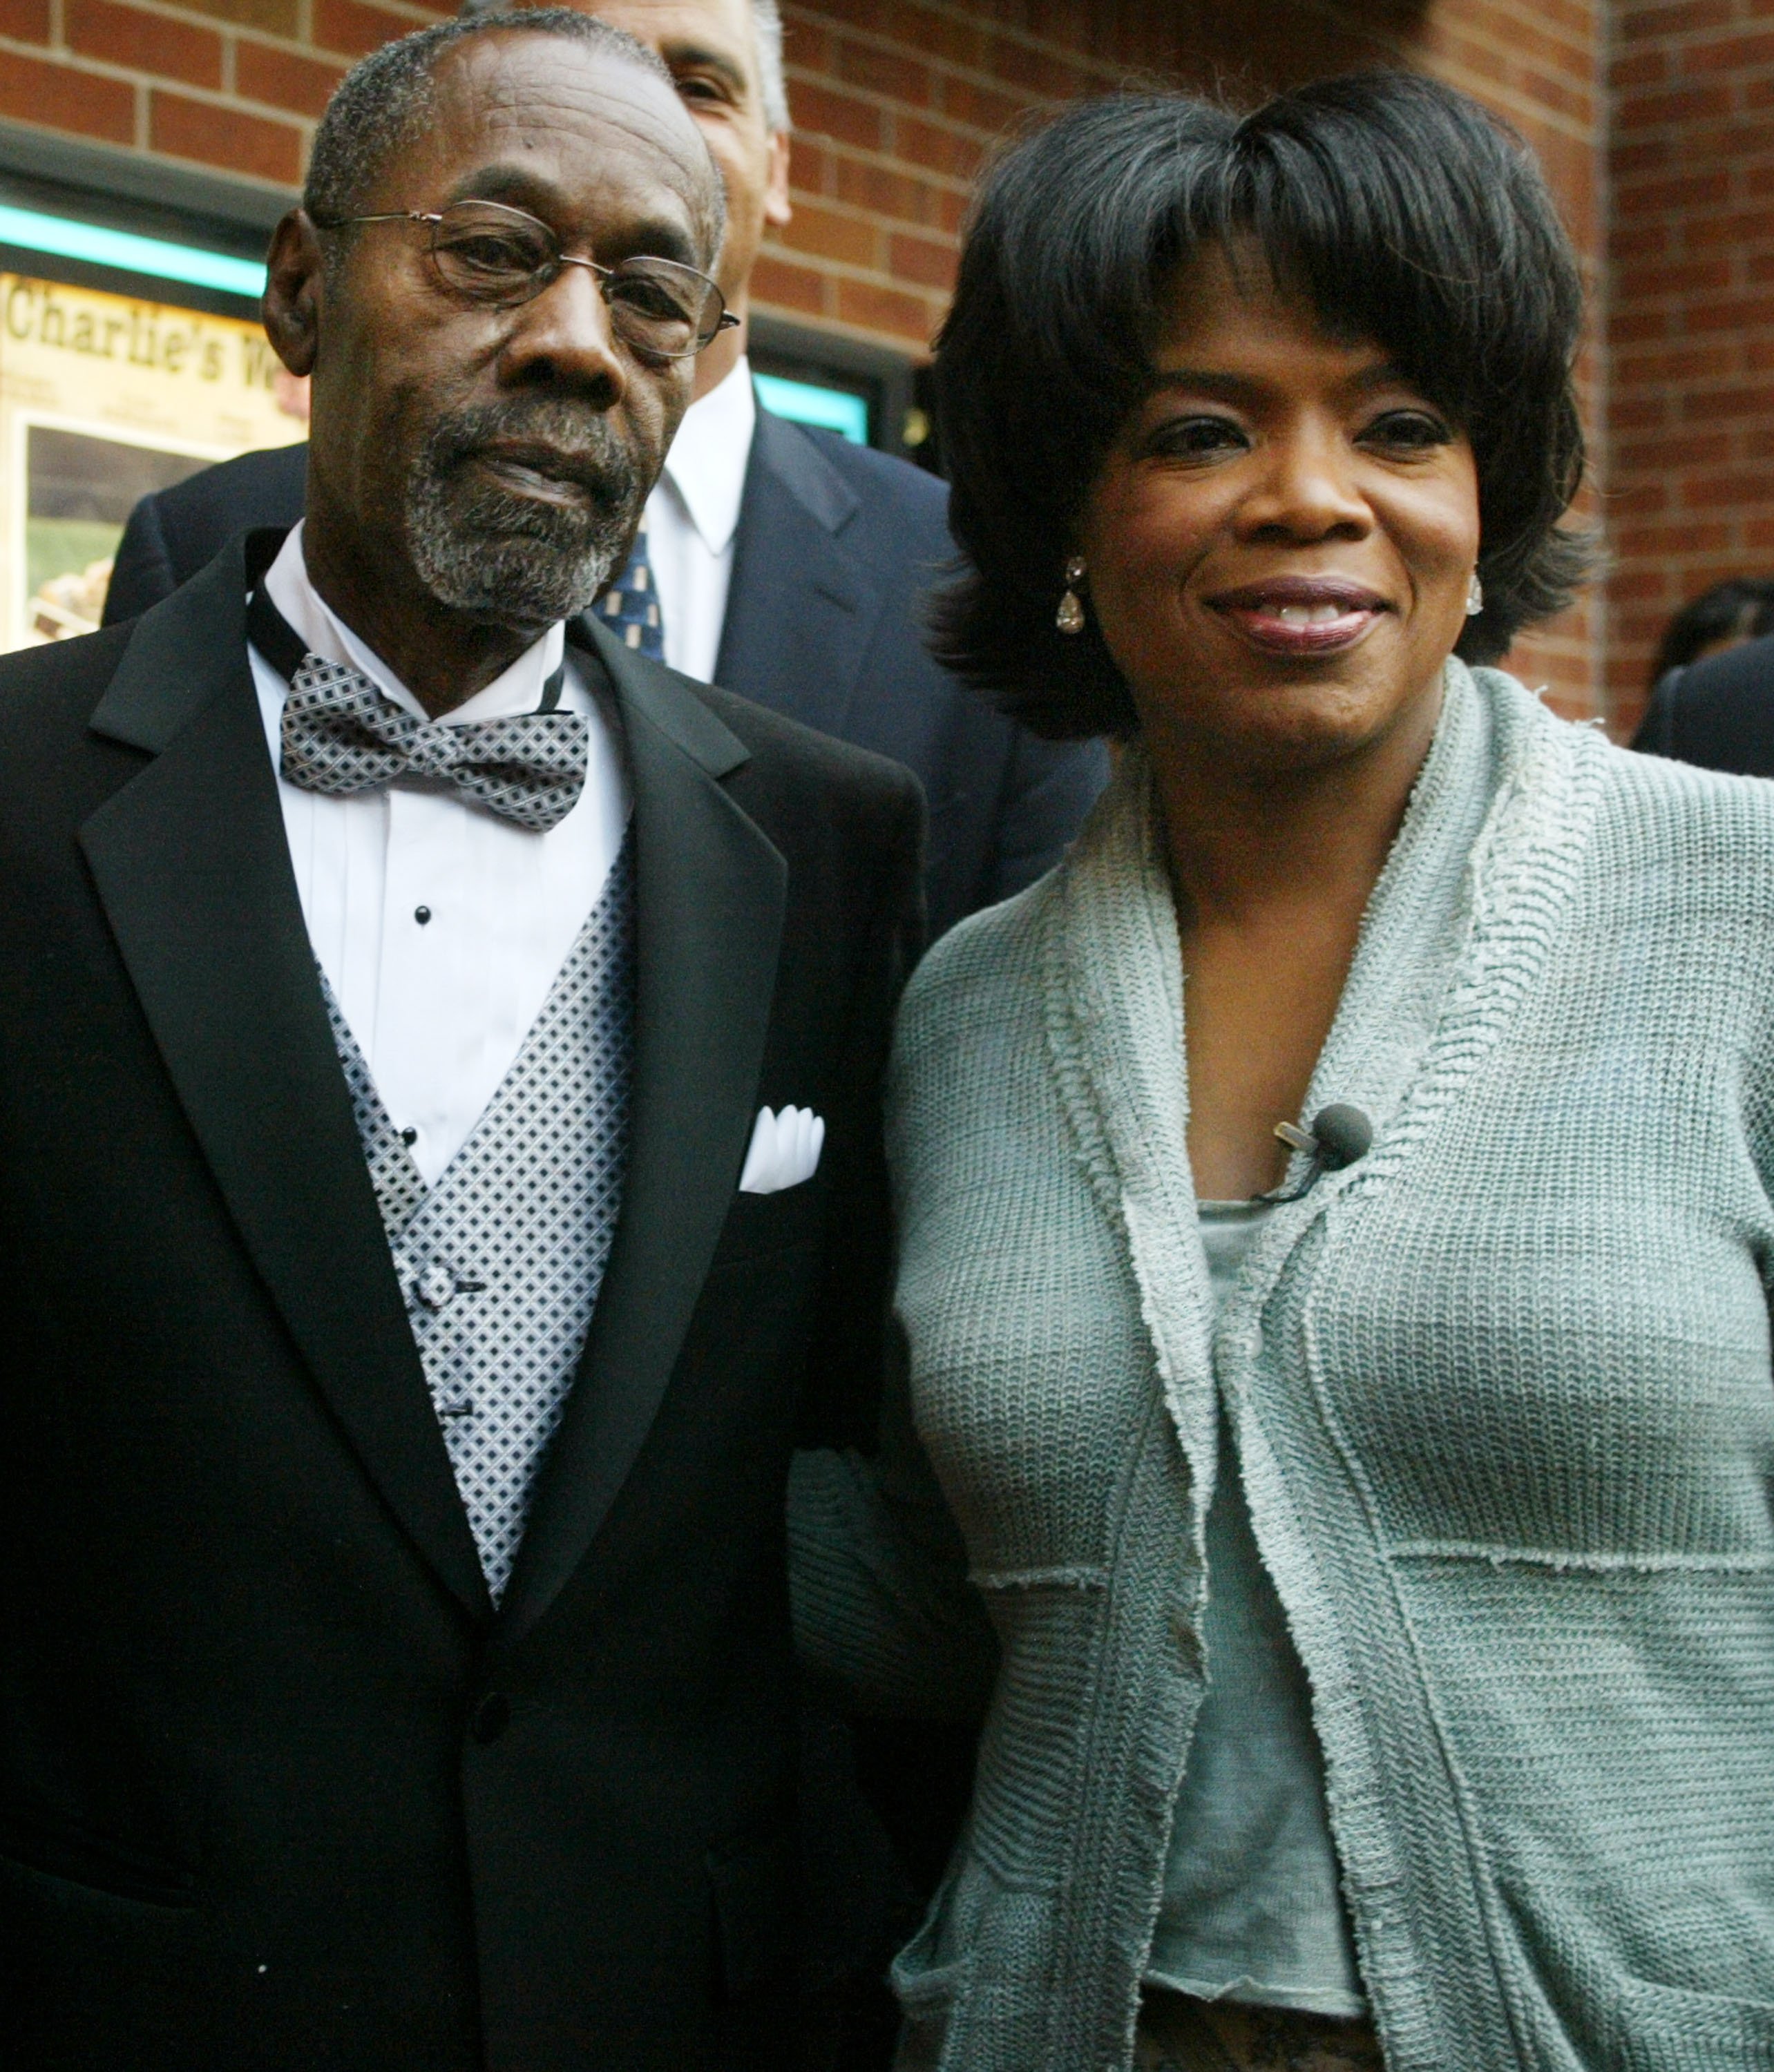 Vernon Winfrey and his daughter, Oprah Winfrey, pictured arriving at the opening of "Charlie's War" at the Nashville Film Festival at the Green Hills Regal Cinema on May 2, 2003, in Nashville, Tennessee. | Source: Getty Images